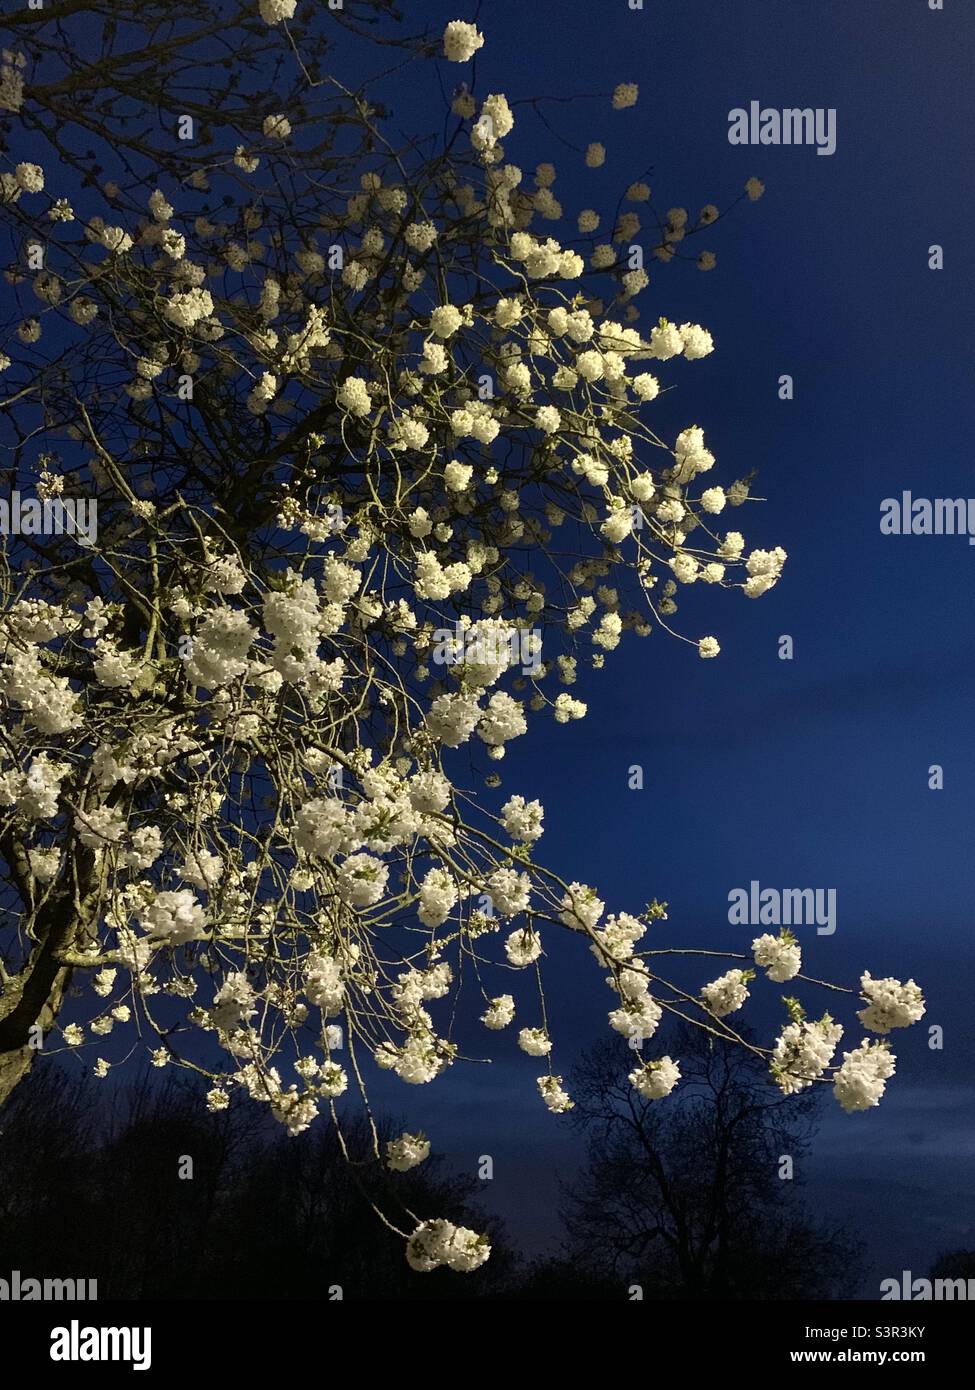 White blossom tree at dusk lit up by street lamp against blue sky Stock Photo